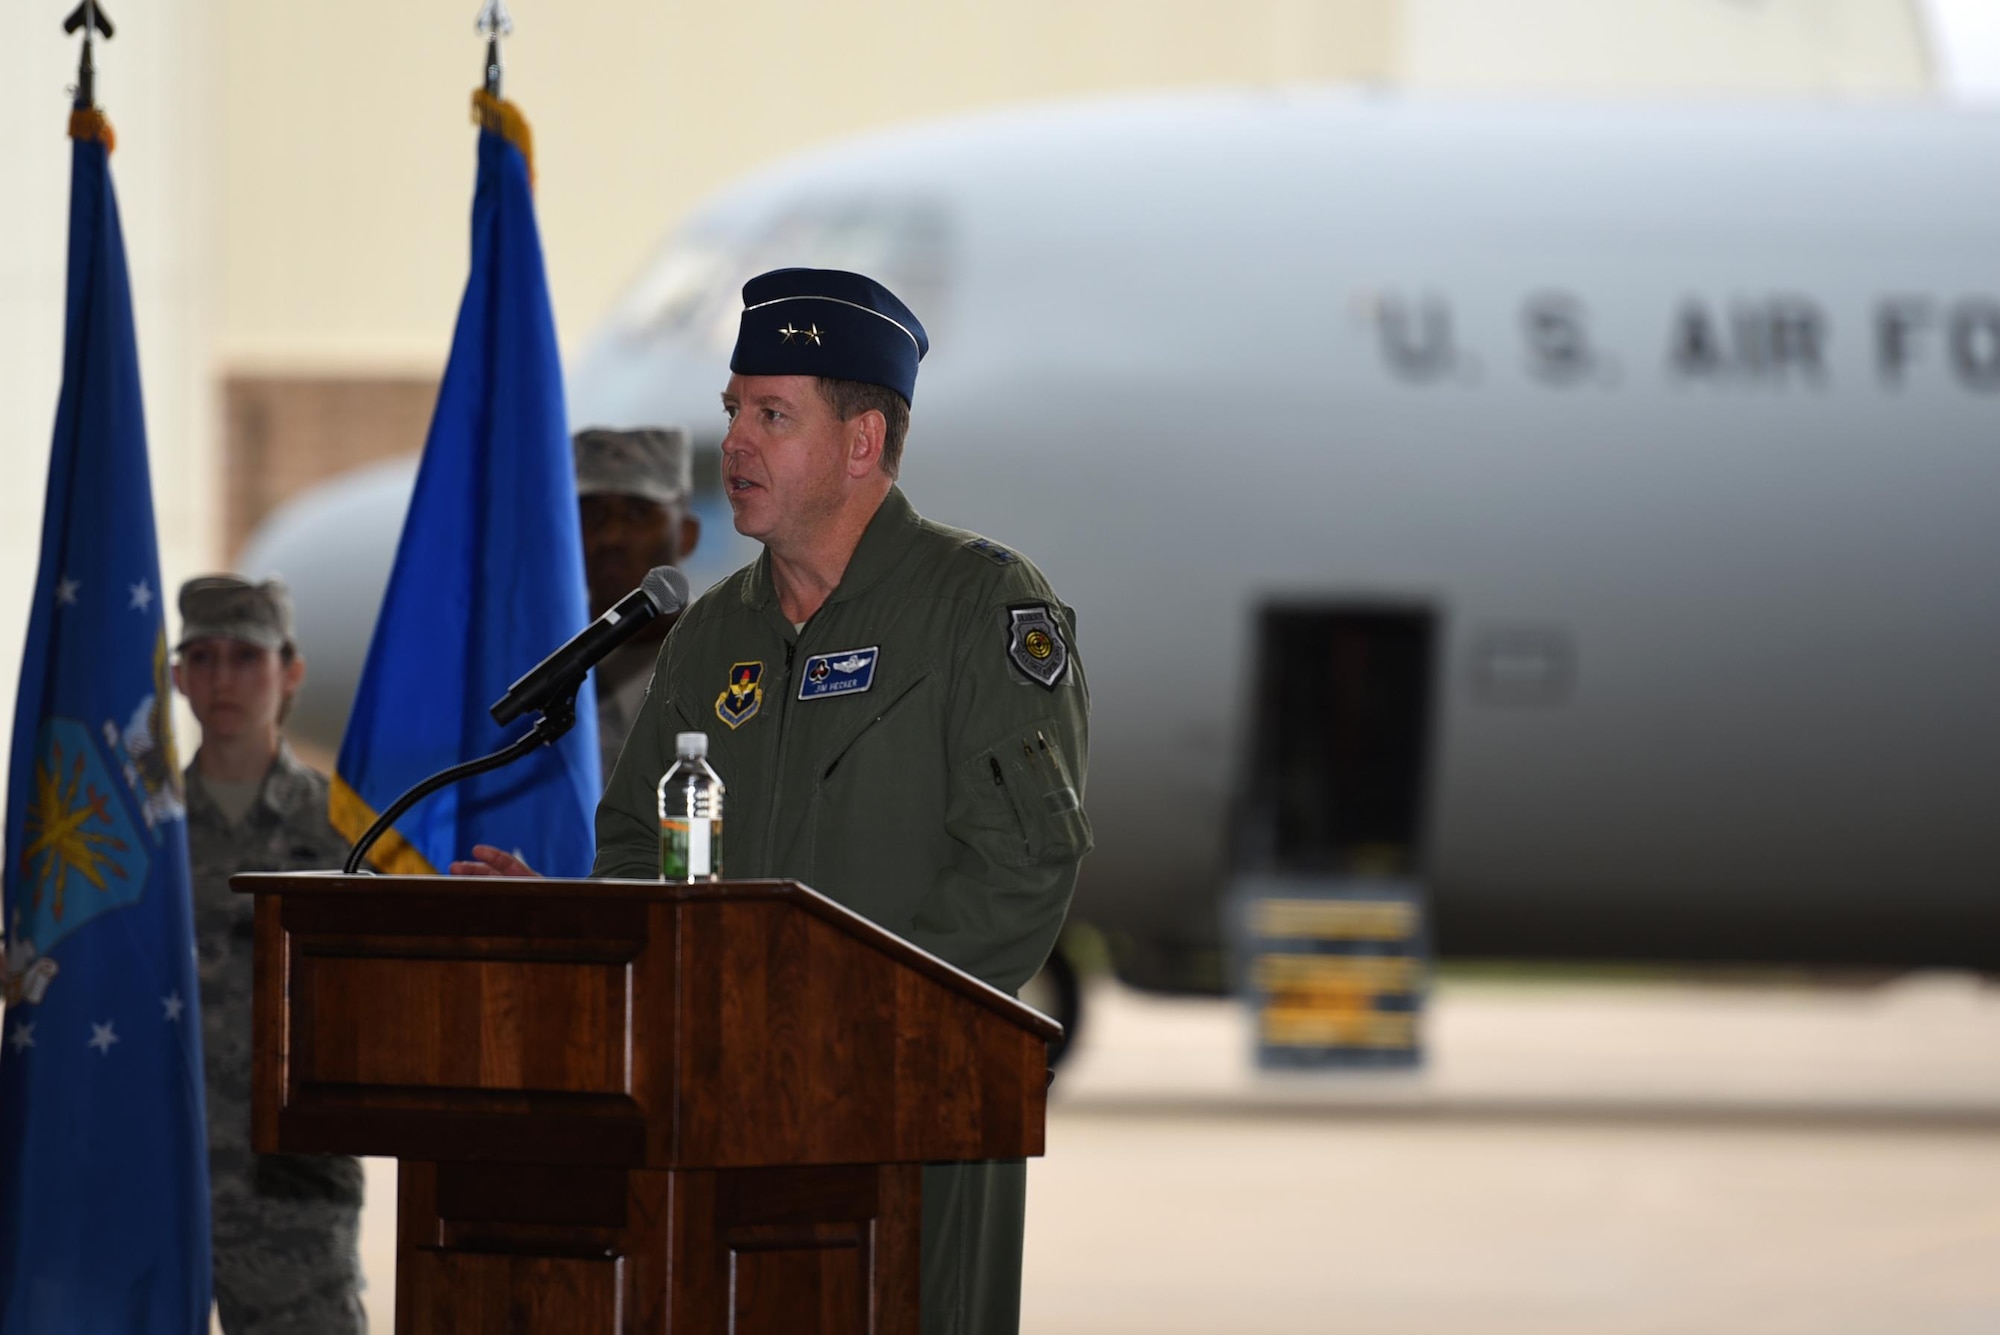 U.S. Air Force Maj. Gen. James Hecker, 19th Air Force commander, speaks at an arrival ceremony for the newest C-130J assigned to the 314th Airlift Wing Feb. 27, 2017, at Little Rock Air Force Base, Ark. The aircraft was the final new C-130J to be delivered to the 314th AW and marks the end of an airframe transition which lasted more than a decade. (U.S. Air Force photo by Airman 1st Class Kevin Sommer Giron)